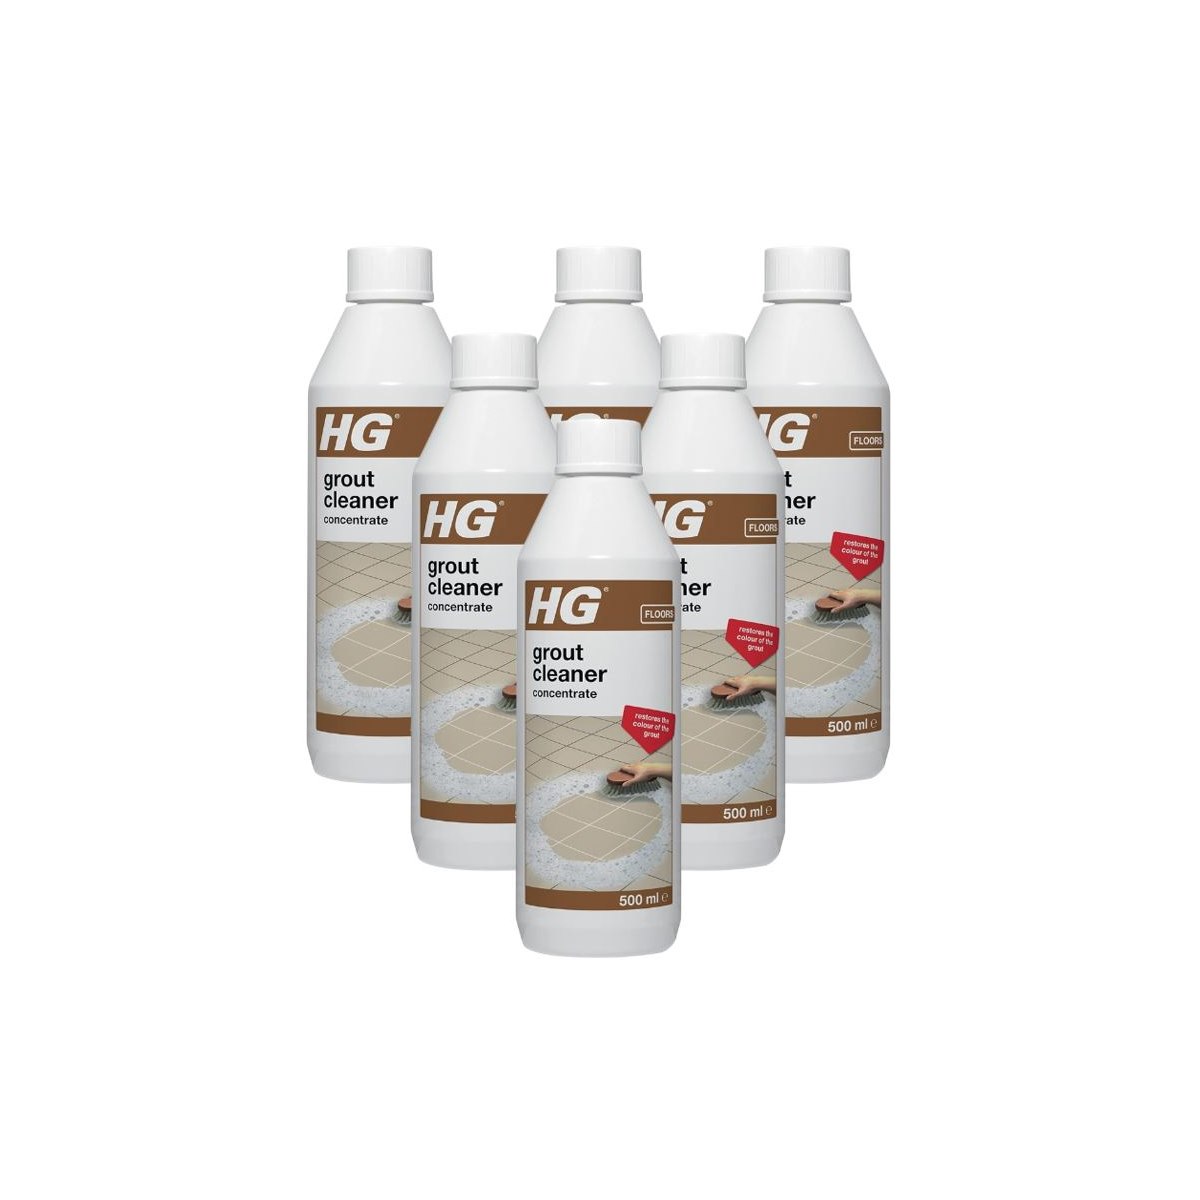 Case of 6 x HG Grout Cleaner Concentrate 500ml